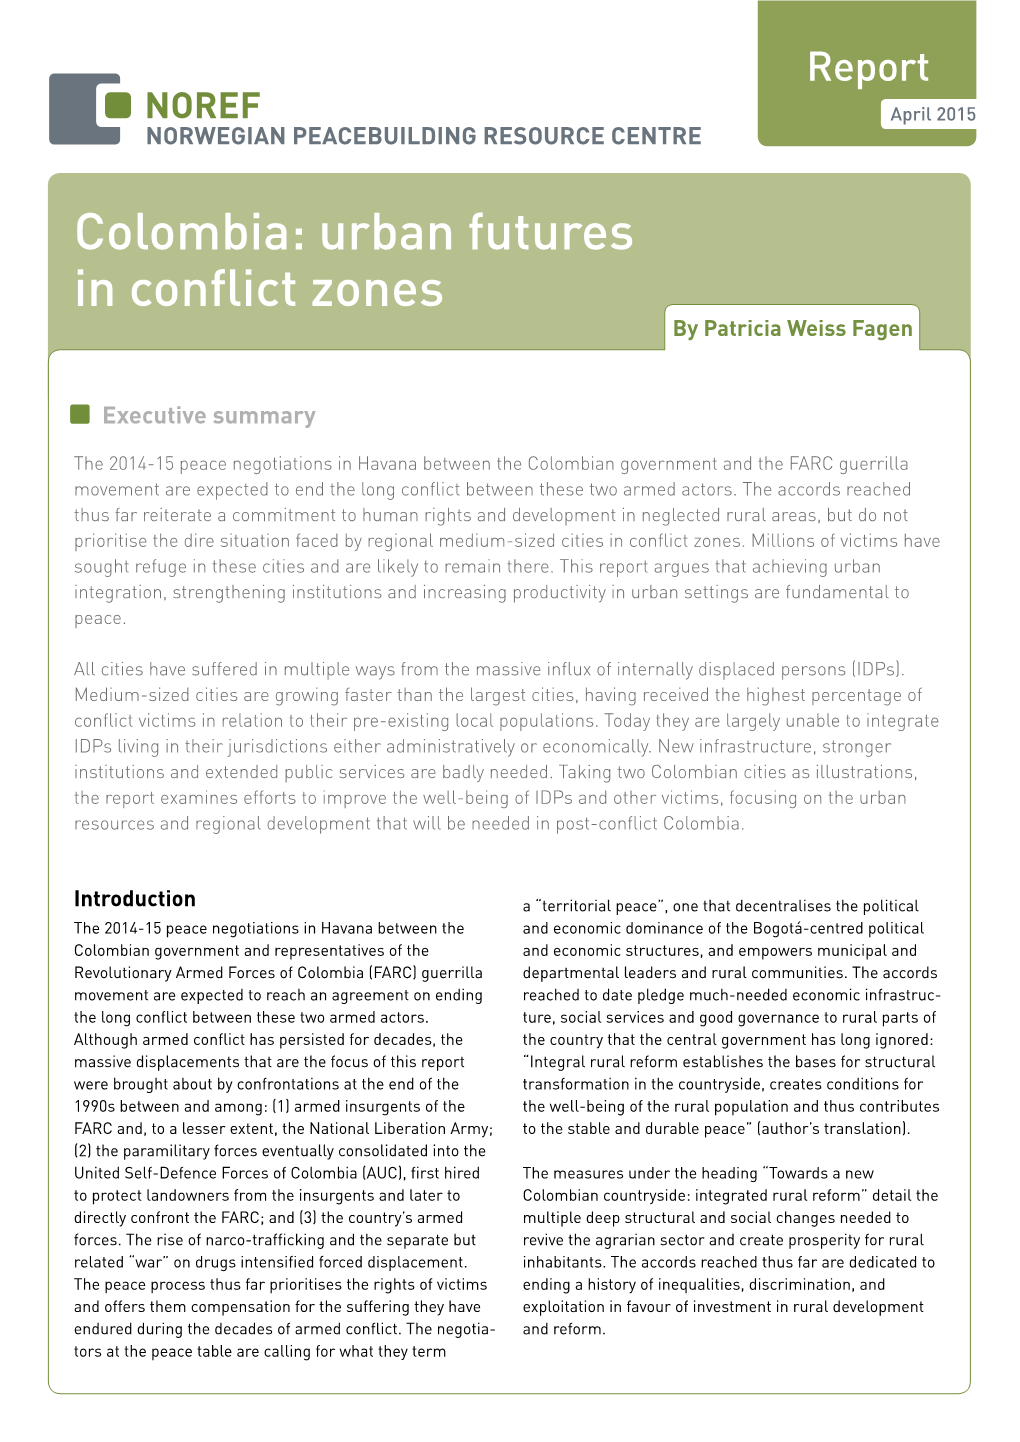 Colombia: Urban Futures in Conflict Zones by Patricia Weiss Fagen